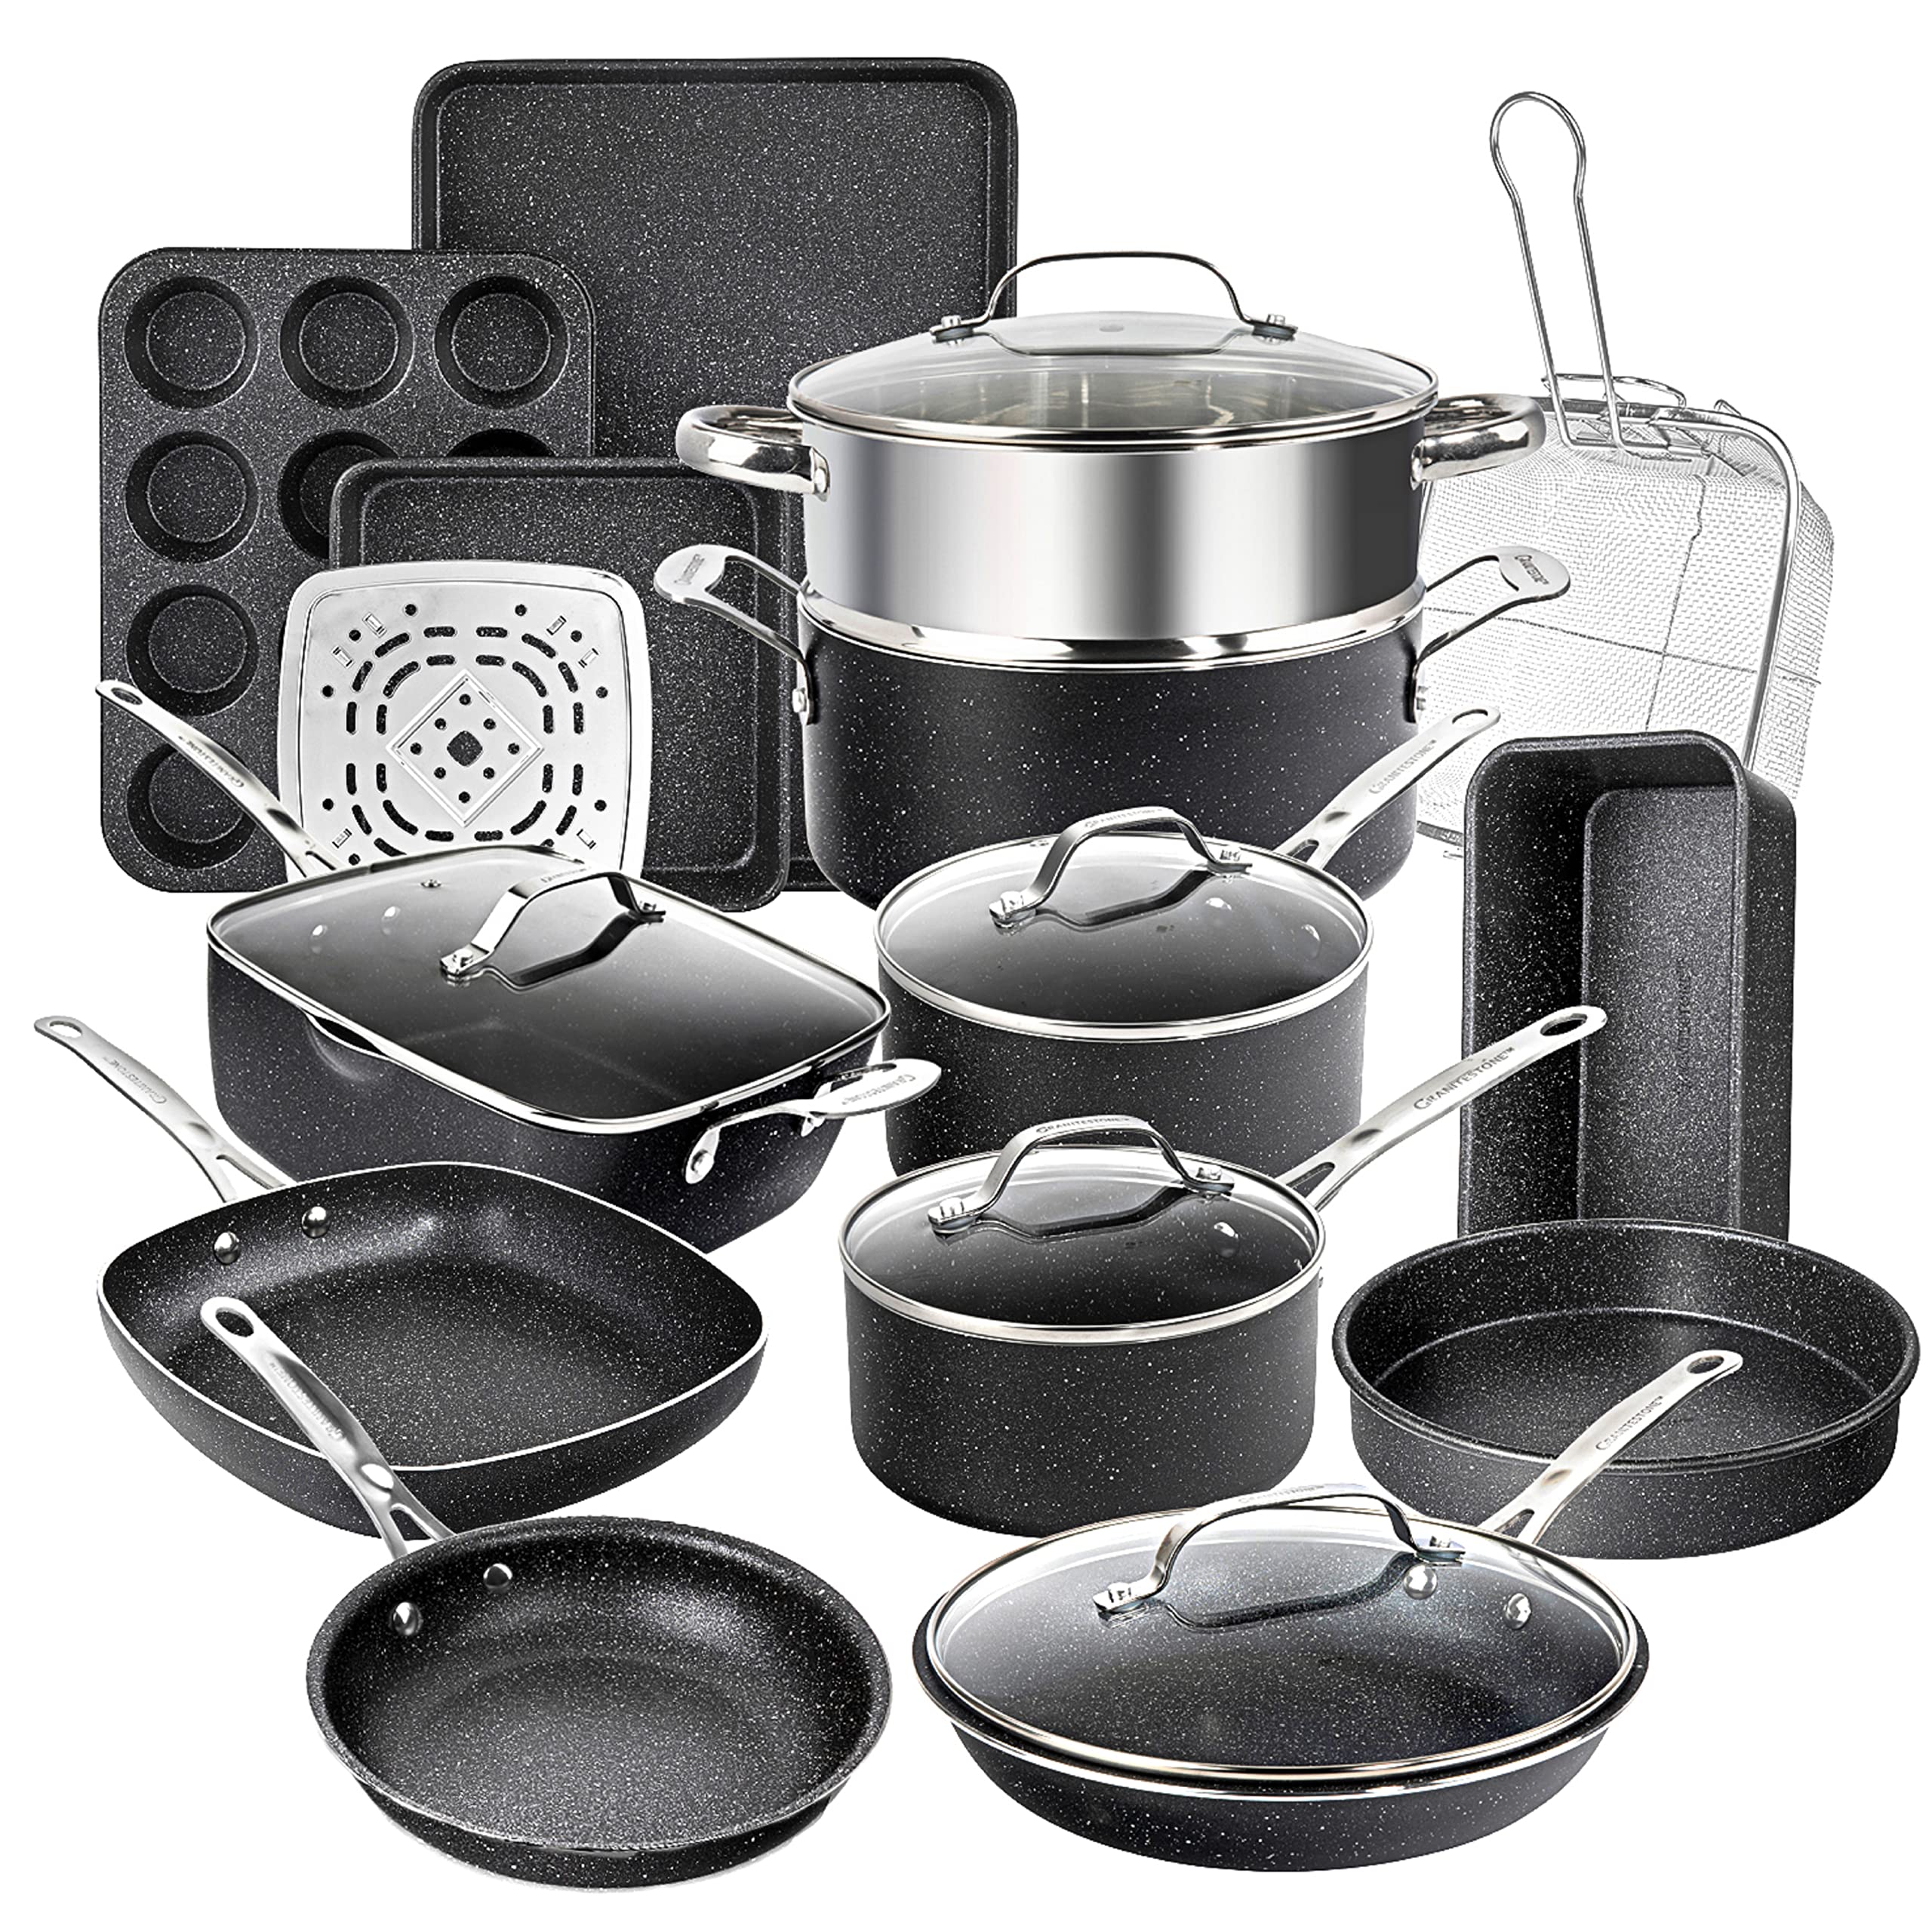 Granite Stone Pots and Pans Set, 20 Piece Complete Cookware + Bakeware Set  with Ultra Nonstick 100% PFOA Free Coating-Includes F